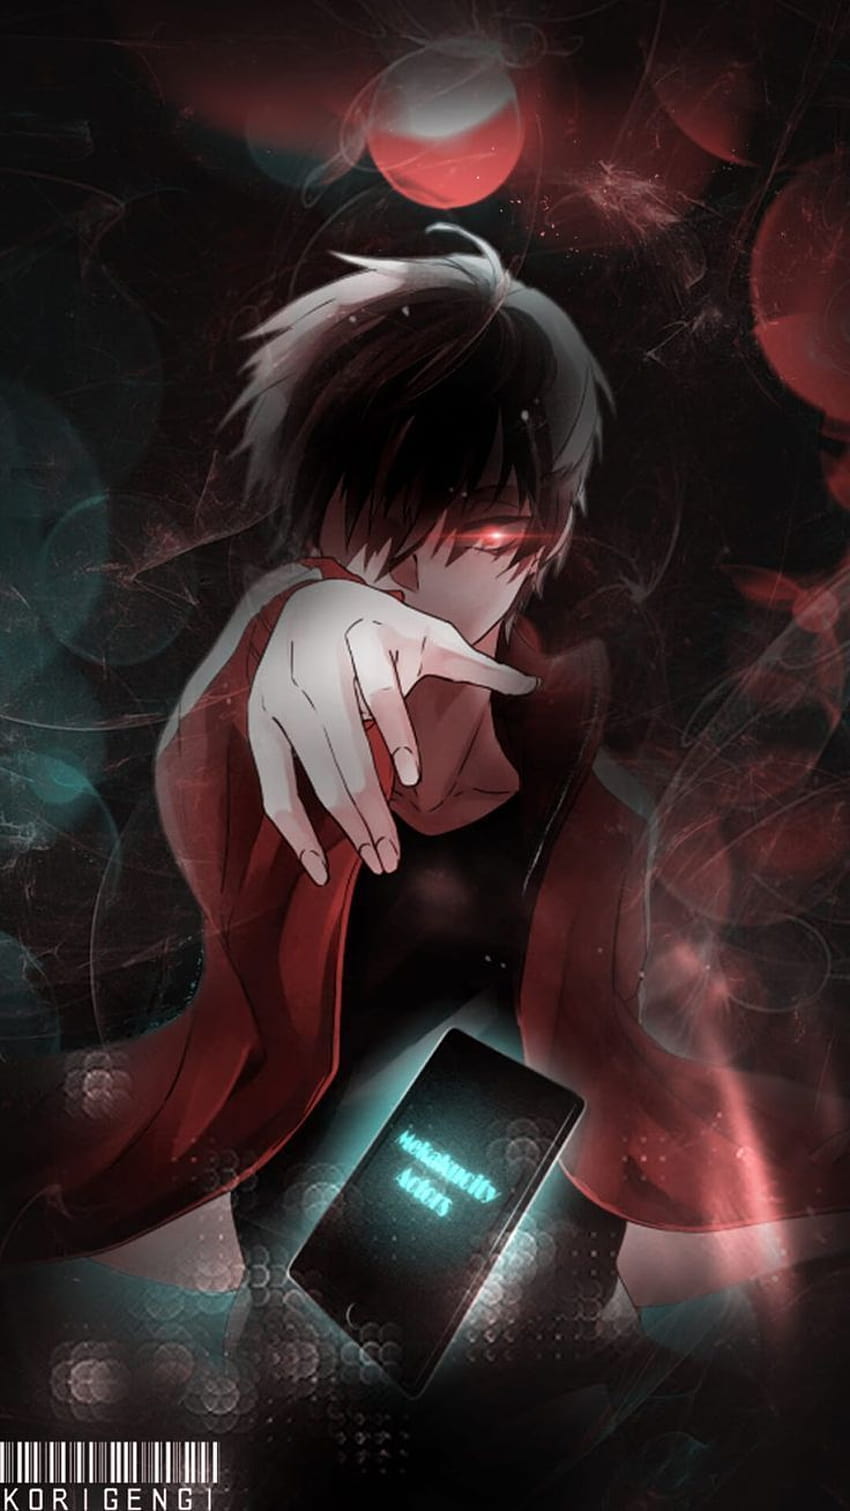 Pin by DaVo on Anime 7w7  Android wallpaper, Anime, Anime wallpaper